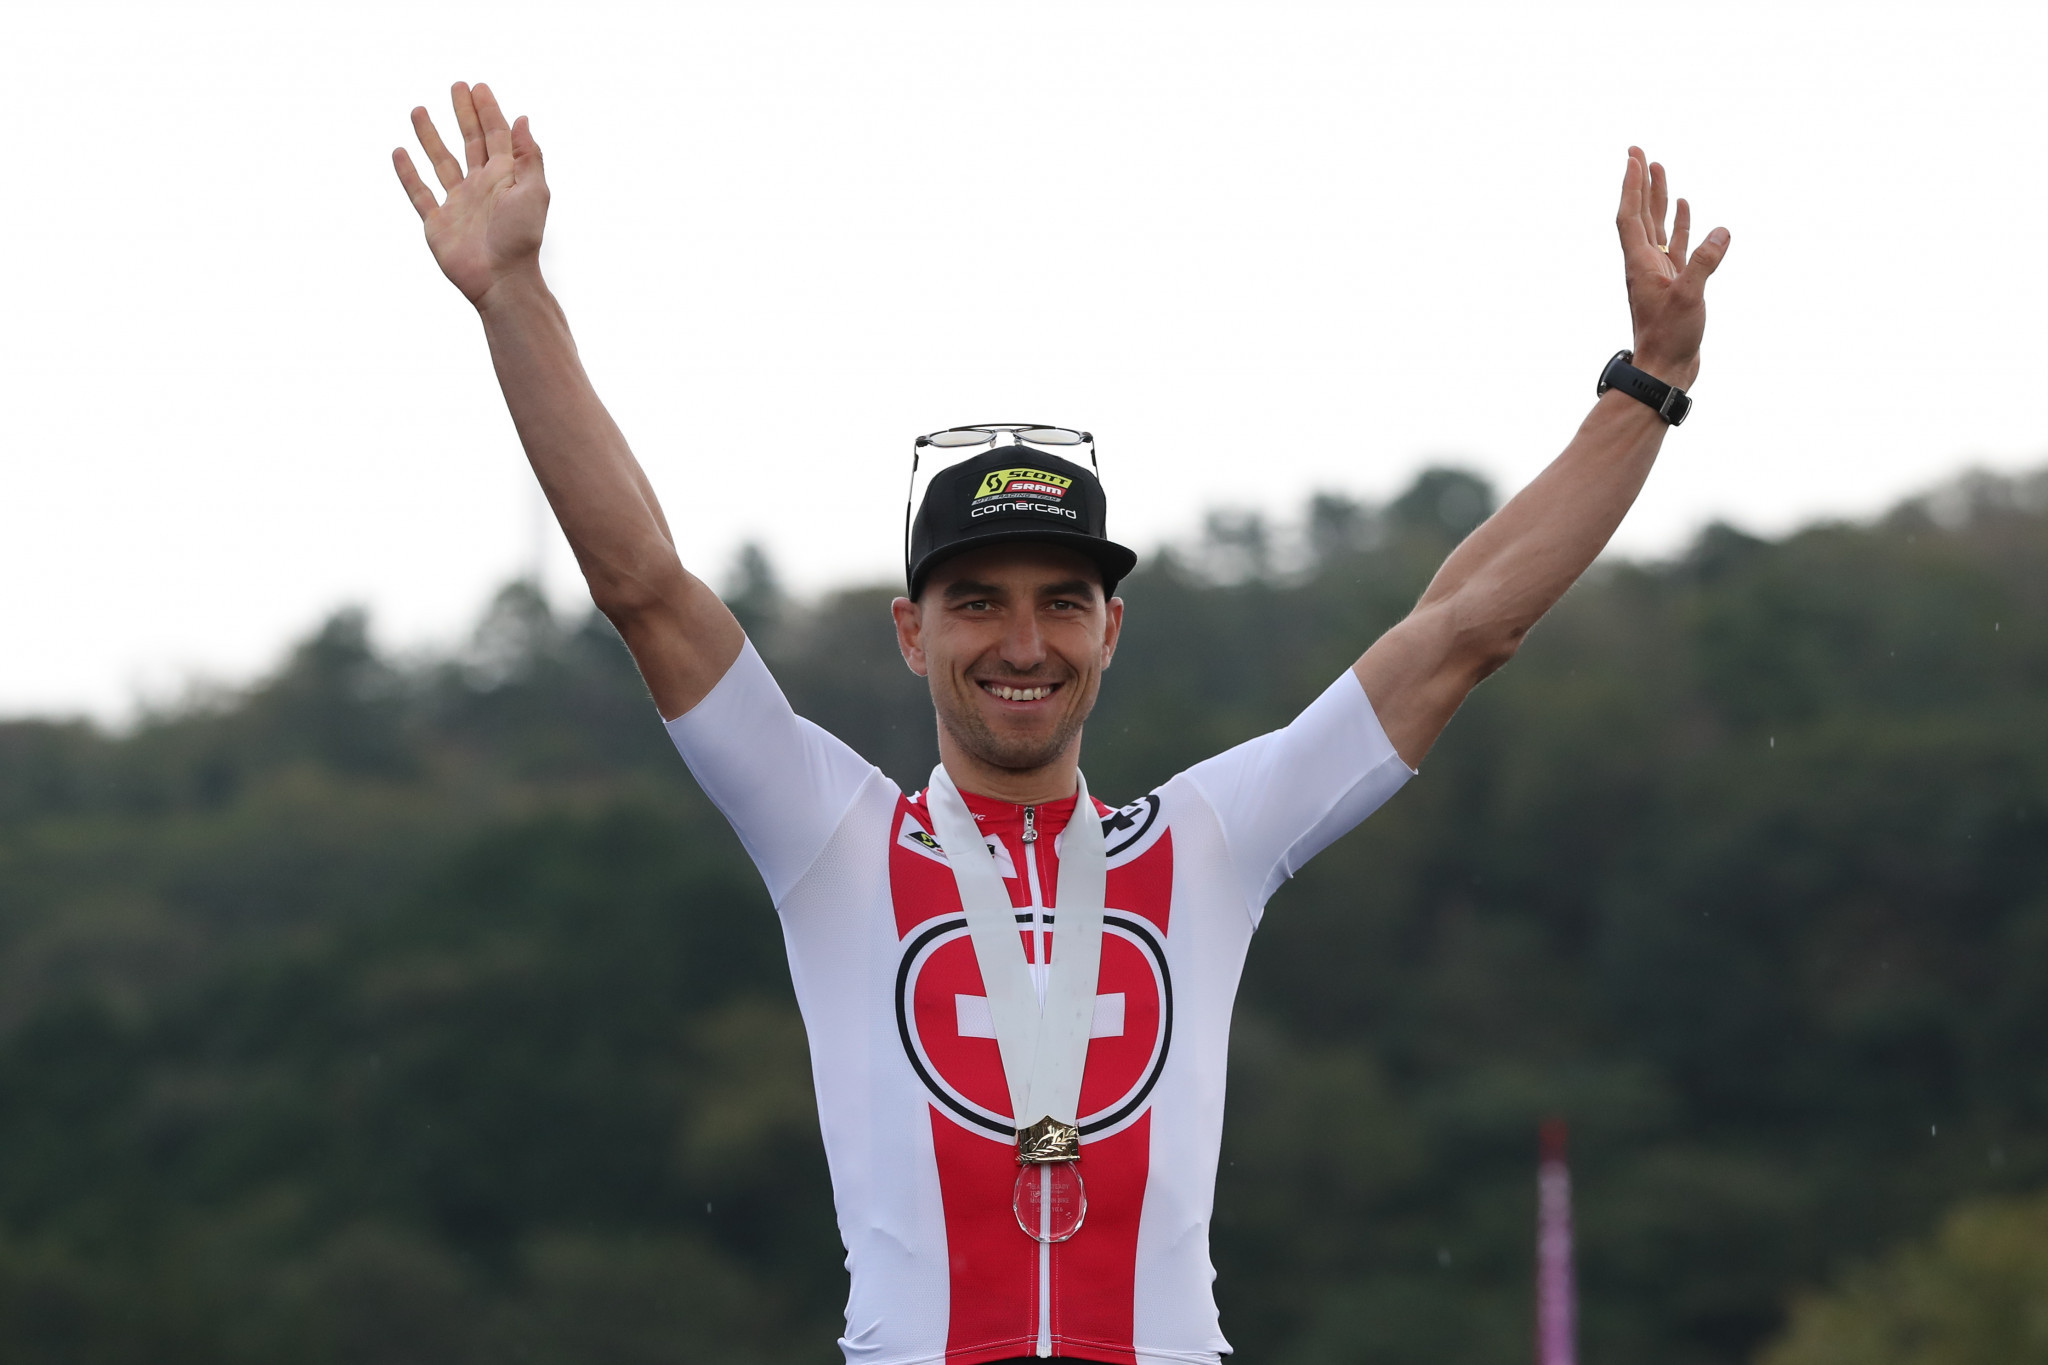 Swiss glory at Tokyo 2020 mountain bike test event after pair of wins